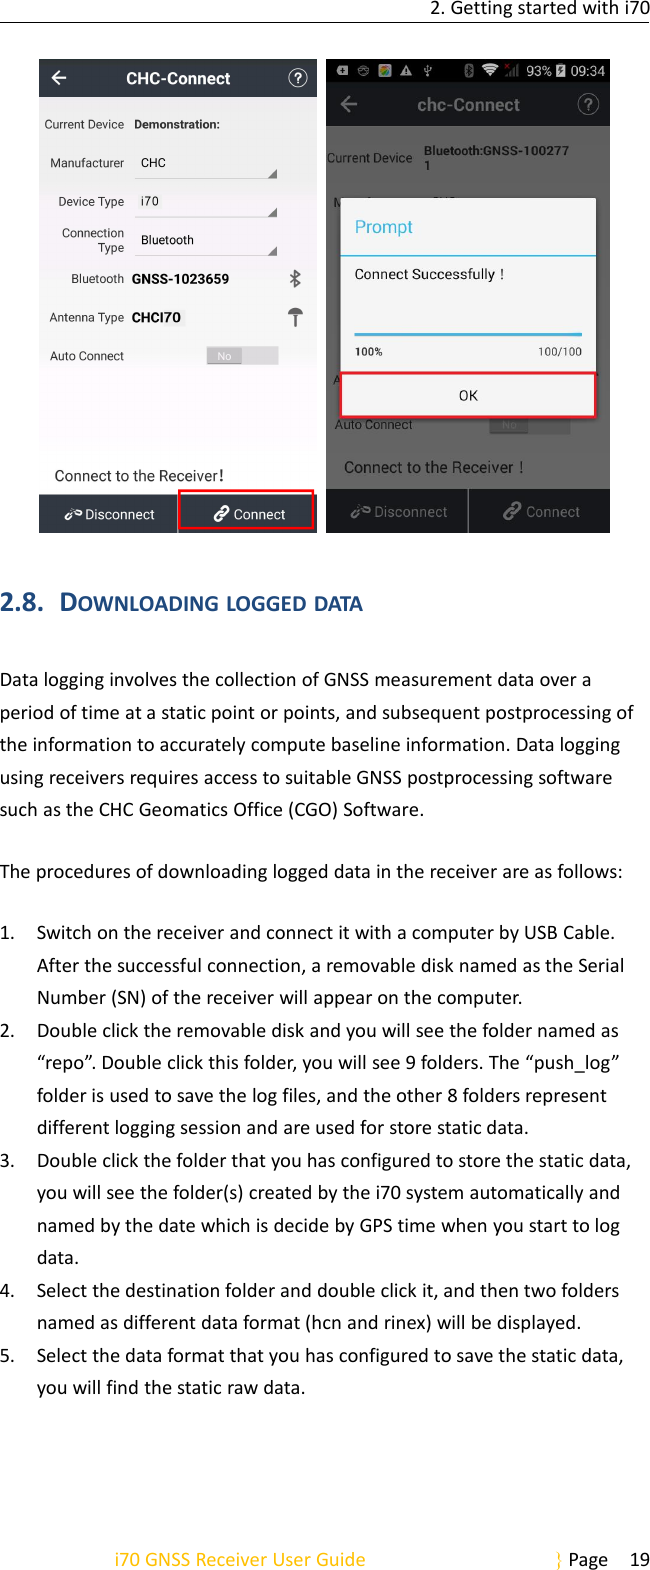 2. Getting started with i70i70 GNSS Receiver User Guide Page 192.8. DOWNLOADING LOGGED DATAData logging involves the collection of GNSS measurement data over aperiod of time at a static point or points, and subsequent postprocessing ofthe information to accurately compute baseline information. Data loggingusing receivers requires access to suitable GNSS postprocessing softwaresuch as the CHC Geomatics Office (CGO) Software.The procedures of downloading logged data in the receiver are as follows:1. Switch on the receiver and connect it with a computer by USB Cable.After the successful connection, a removable disk named as the SerialNumber (SN) of the receiver will appear on the computer.2. Double click the removable disk and you will see the folder named as“repo”. Double click this folder, you will see 9 folders. The “push_log”folder is used to save the log files, and the other 8 folders representdifferent logging session and are used for store static data.3. Double click the folder that you has configured to store the static data,you will see the folder(s) created by the i70 system automatically andnamed by the date which is decide by GPS time when you start to logdata.4. Select the destination folder and double click it, and then two foldersnamed as different data format (hcn and rinex) will be displayed.5. Select the data format that you has configured to save the static data,you will find the static raw data.